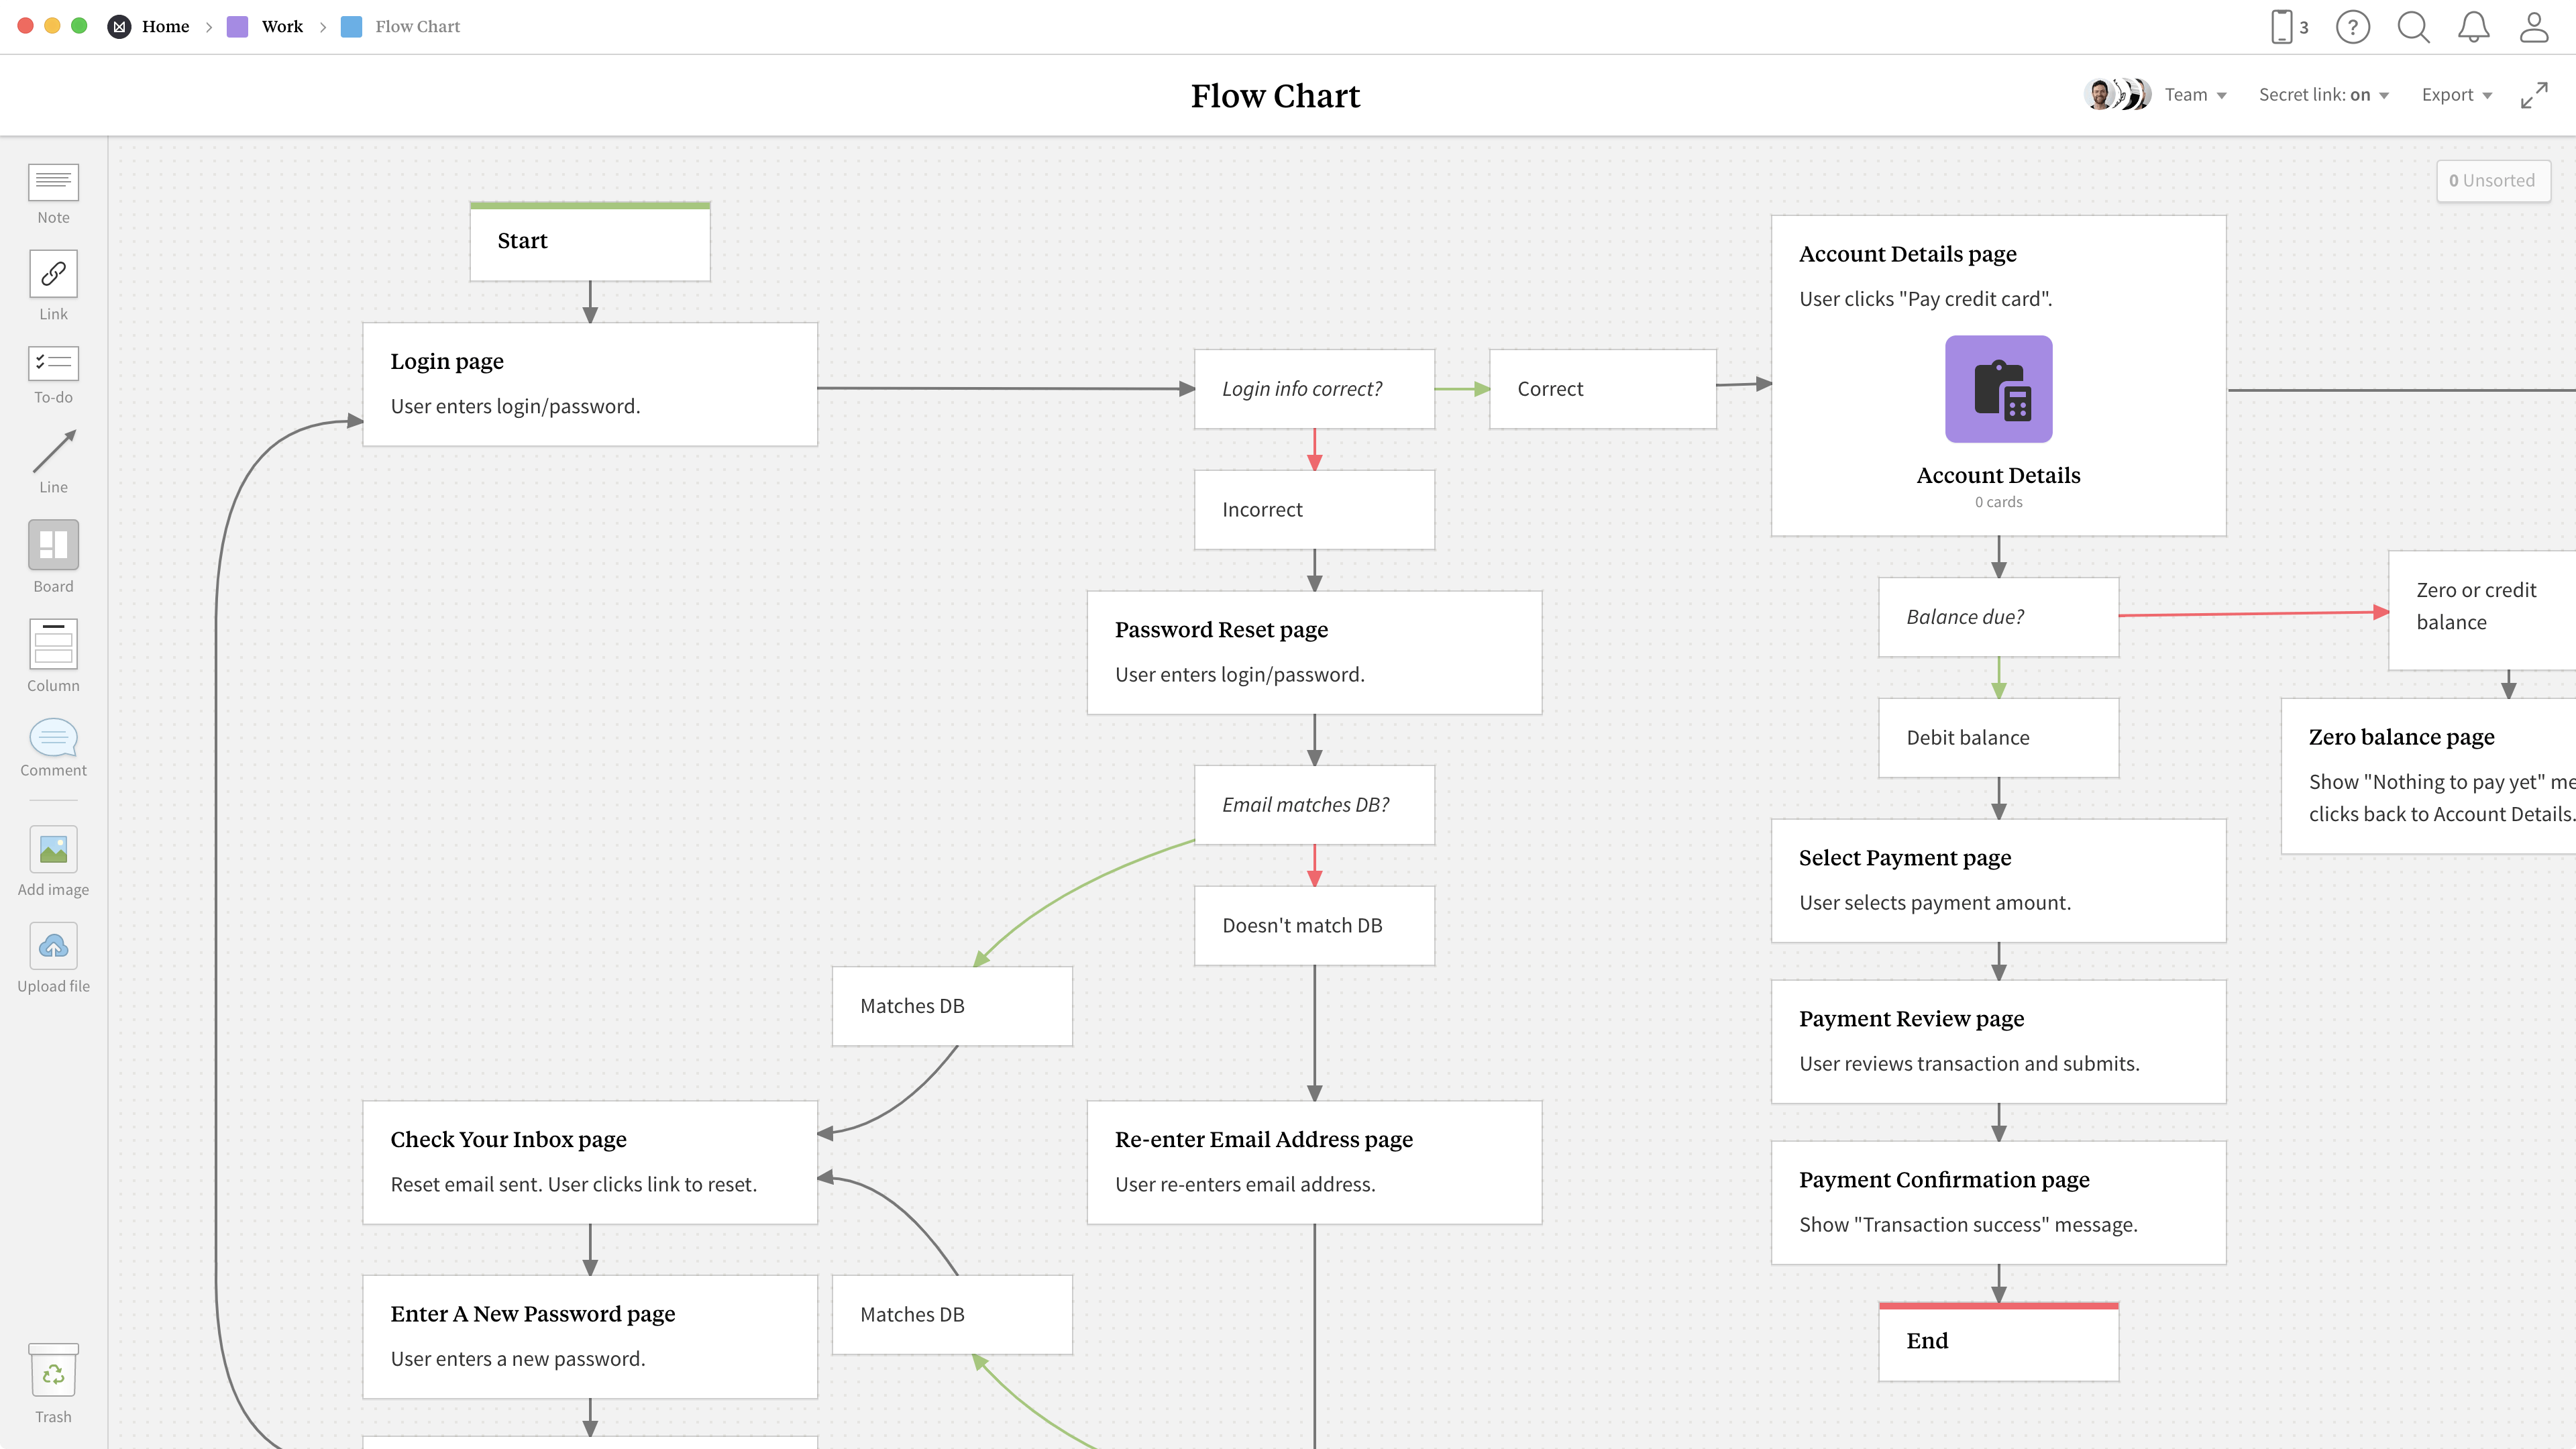 Flow Chart Template, within the Milanote app